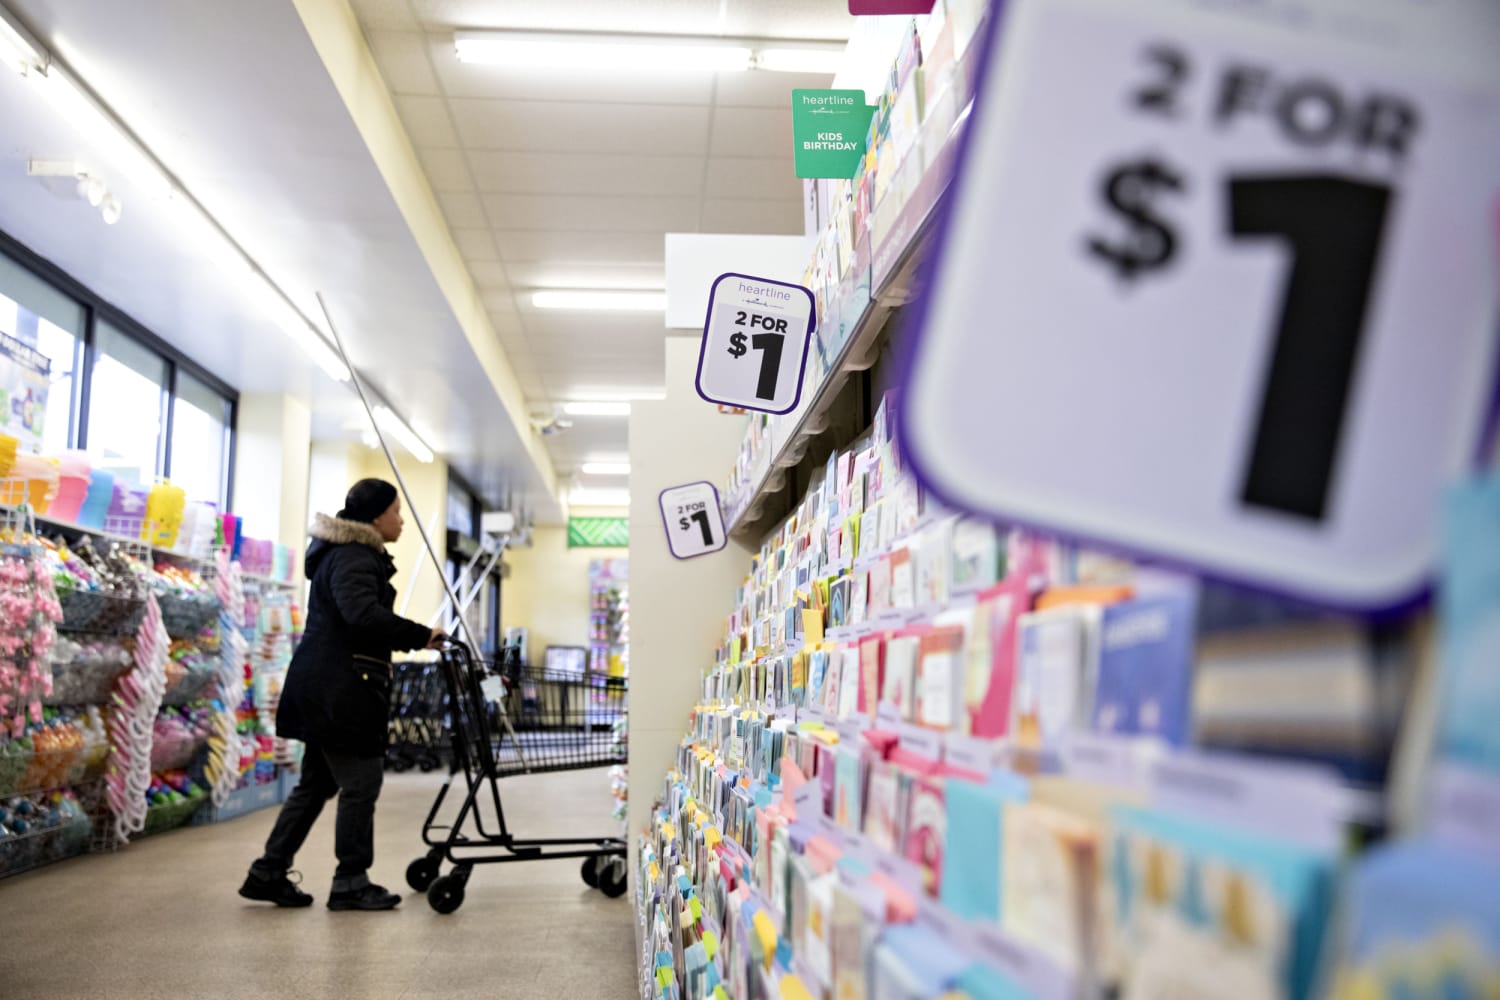 As inflation hits harder, middle-class shoppers gravitate to dollar stores